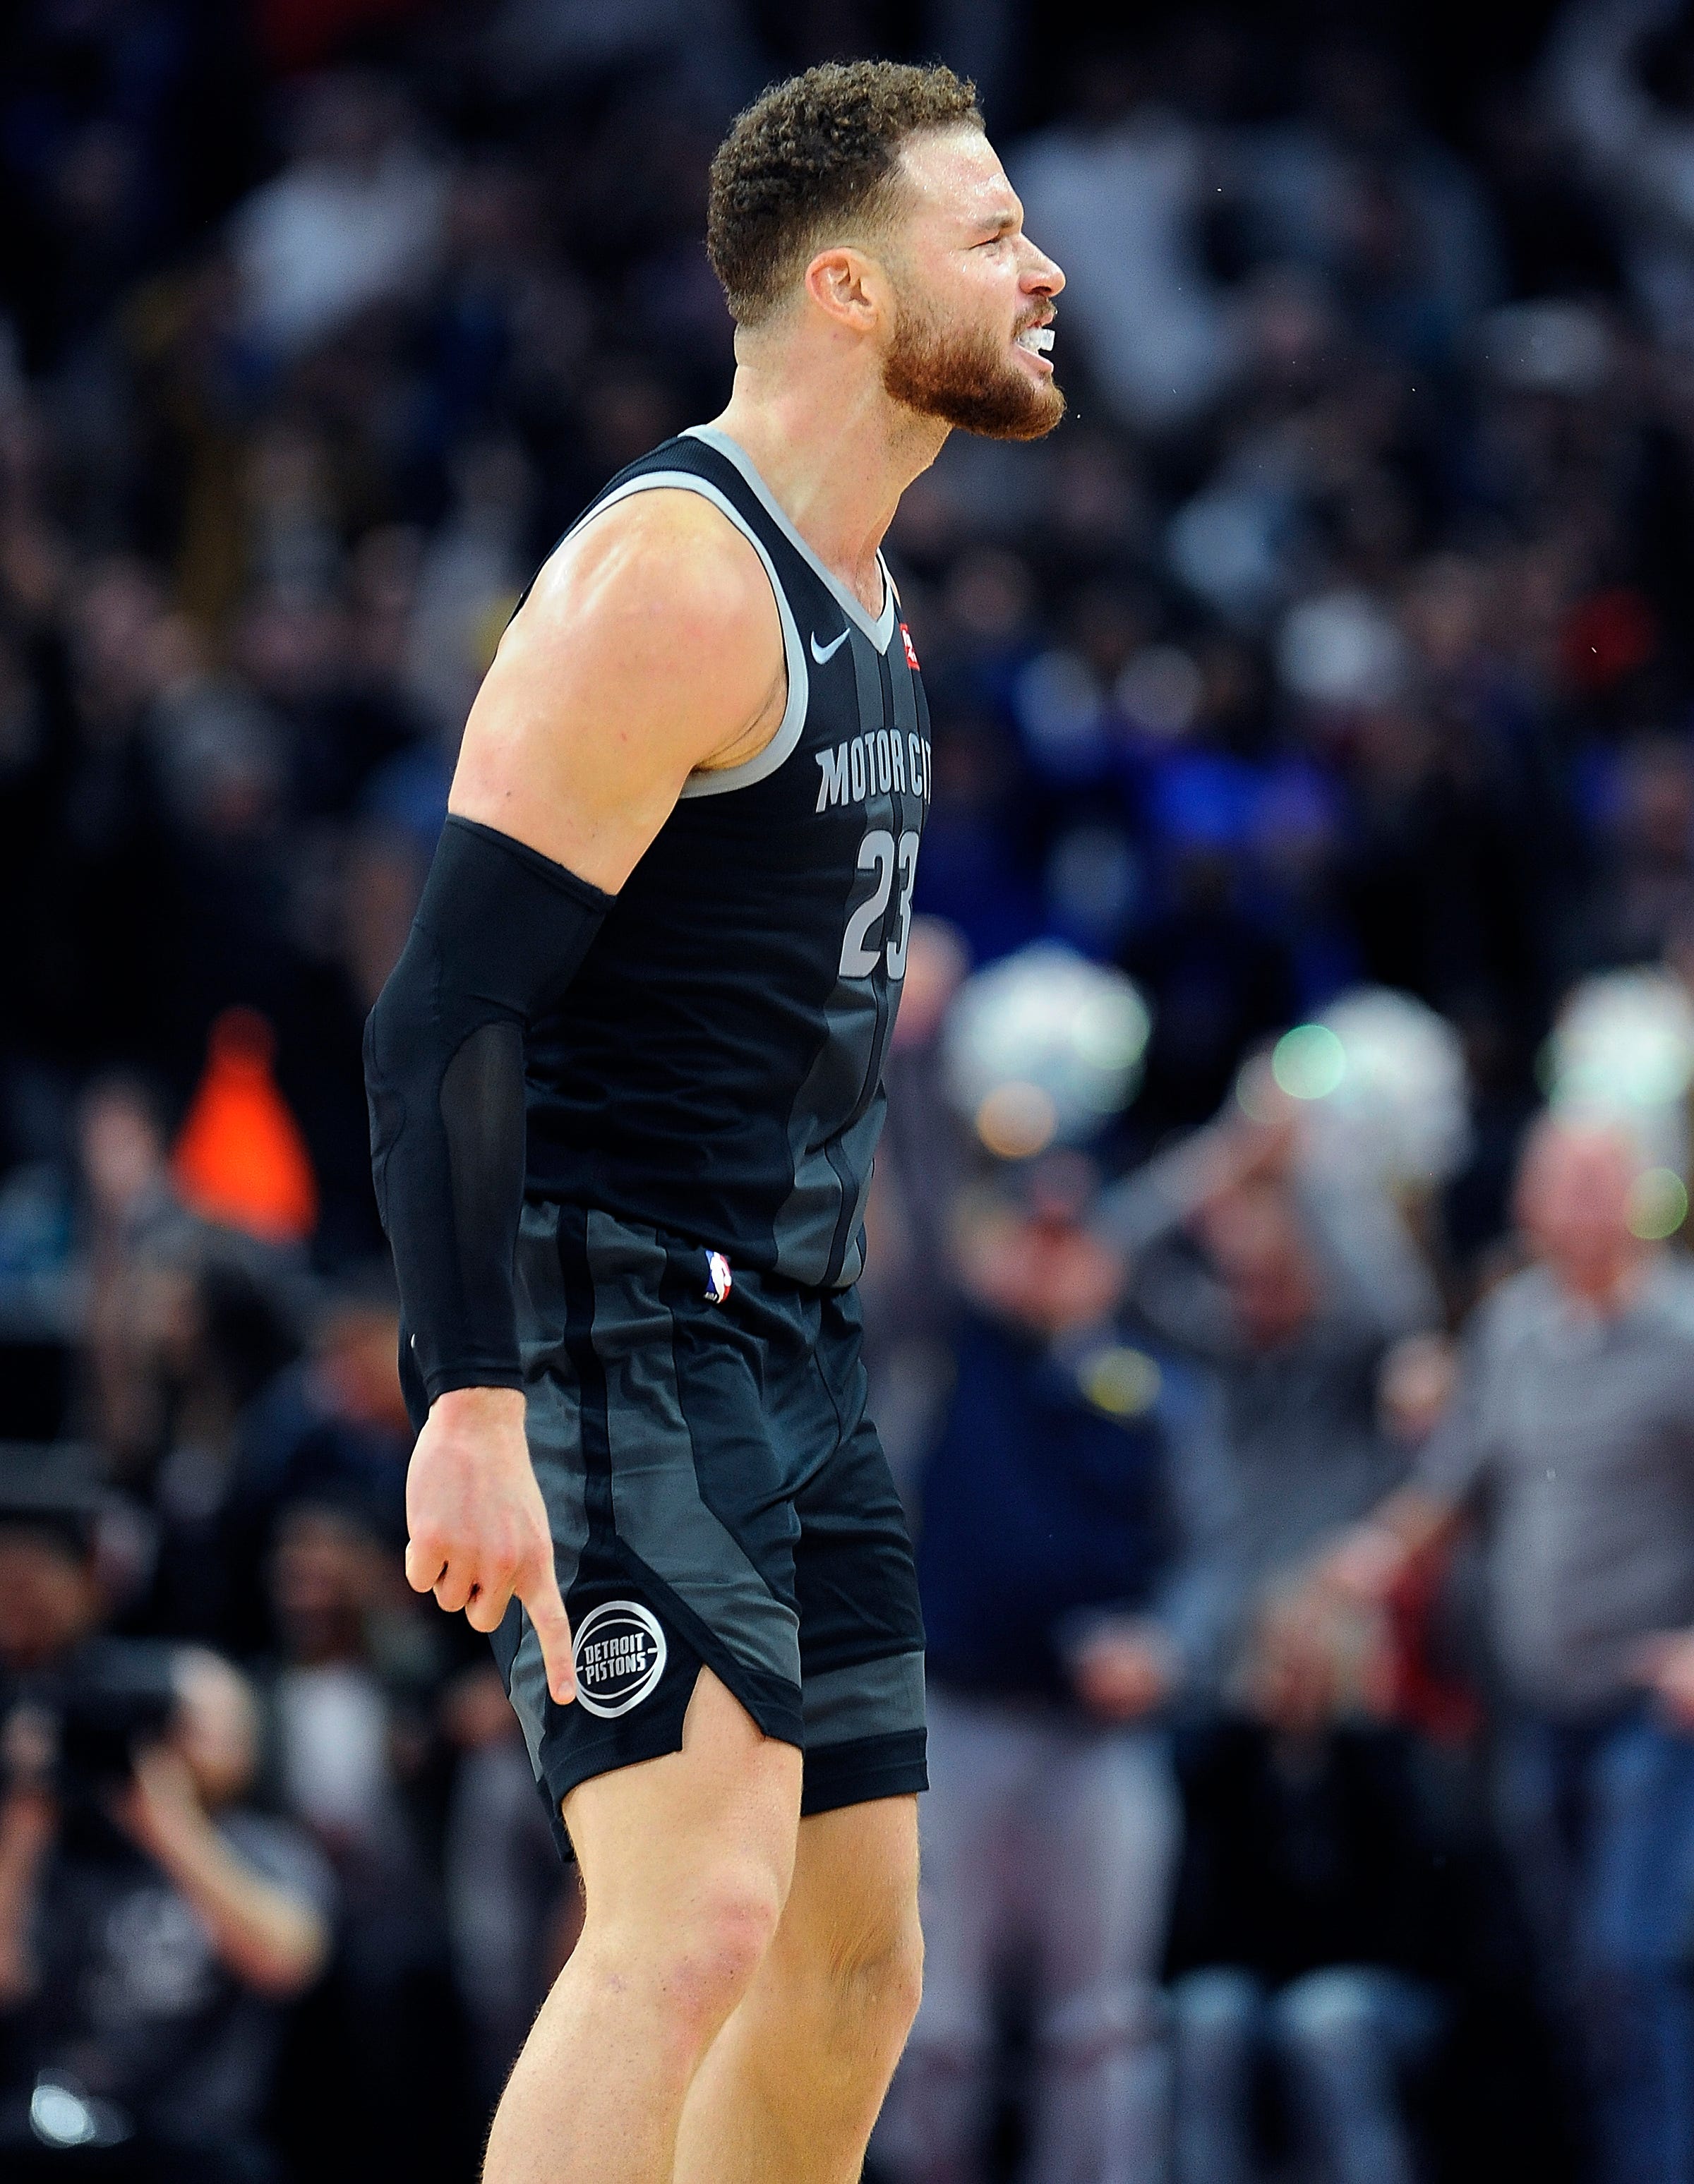 Pistons' Blake Griffin reacts after making a 3 point shot to put the Pistons up by 2 points in the fourth quarter.